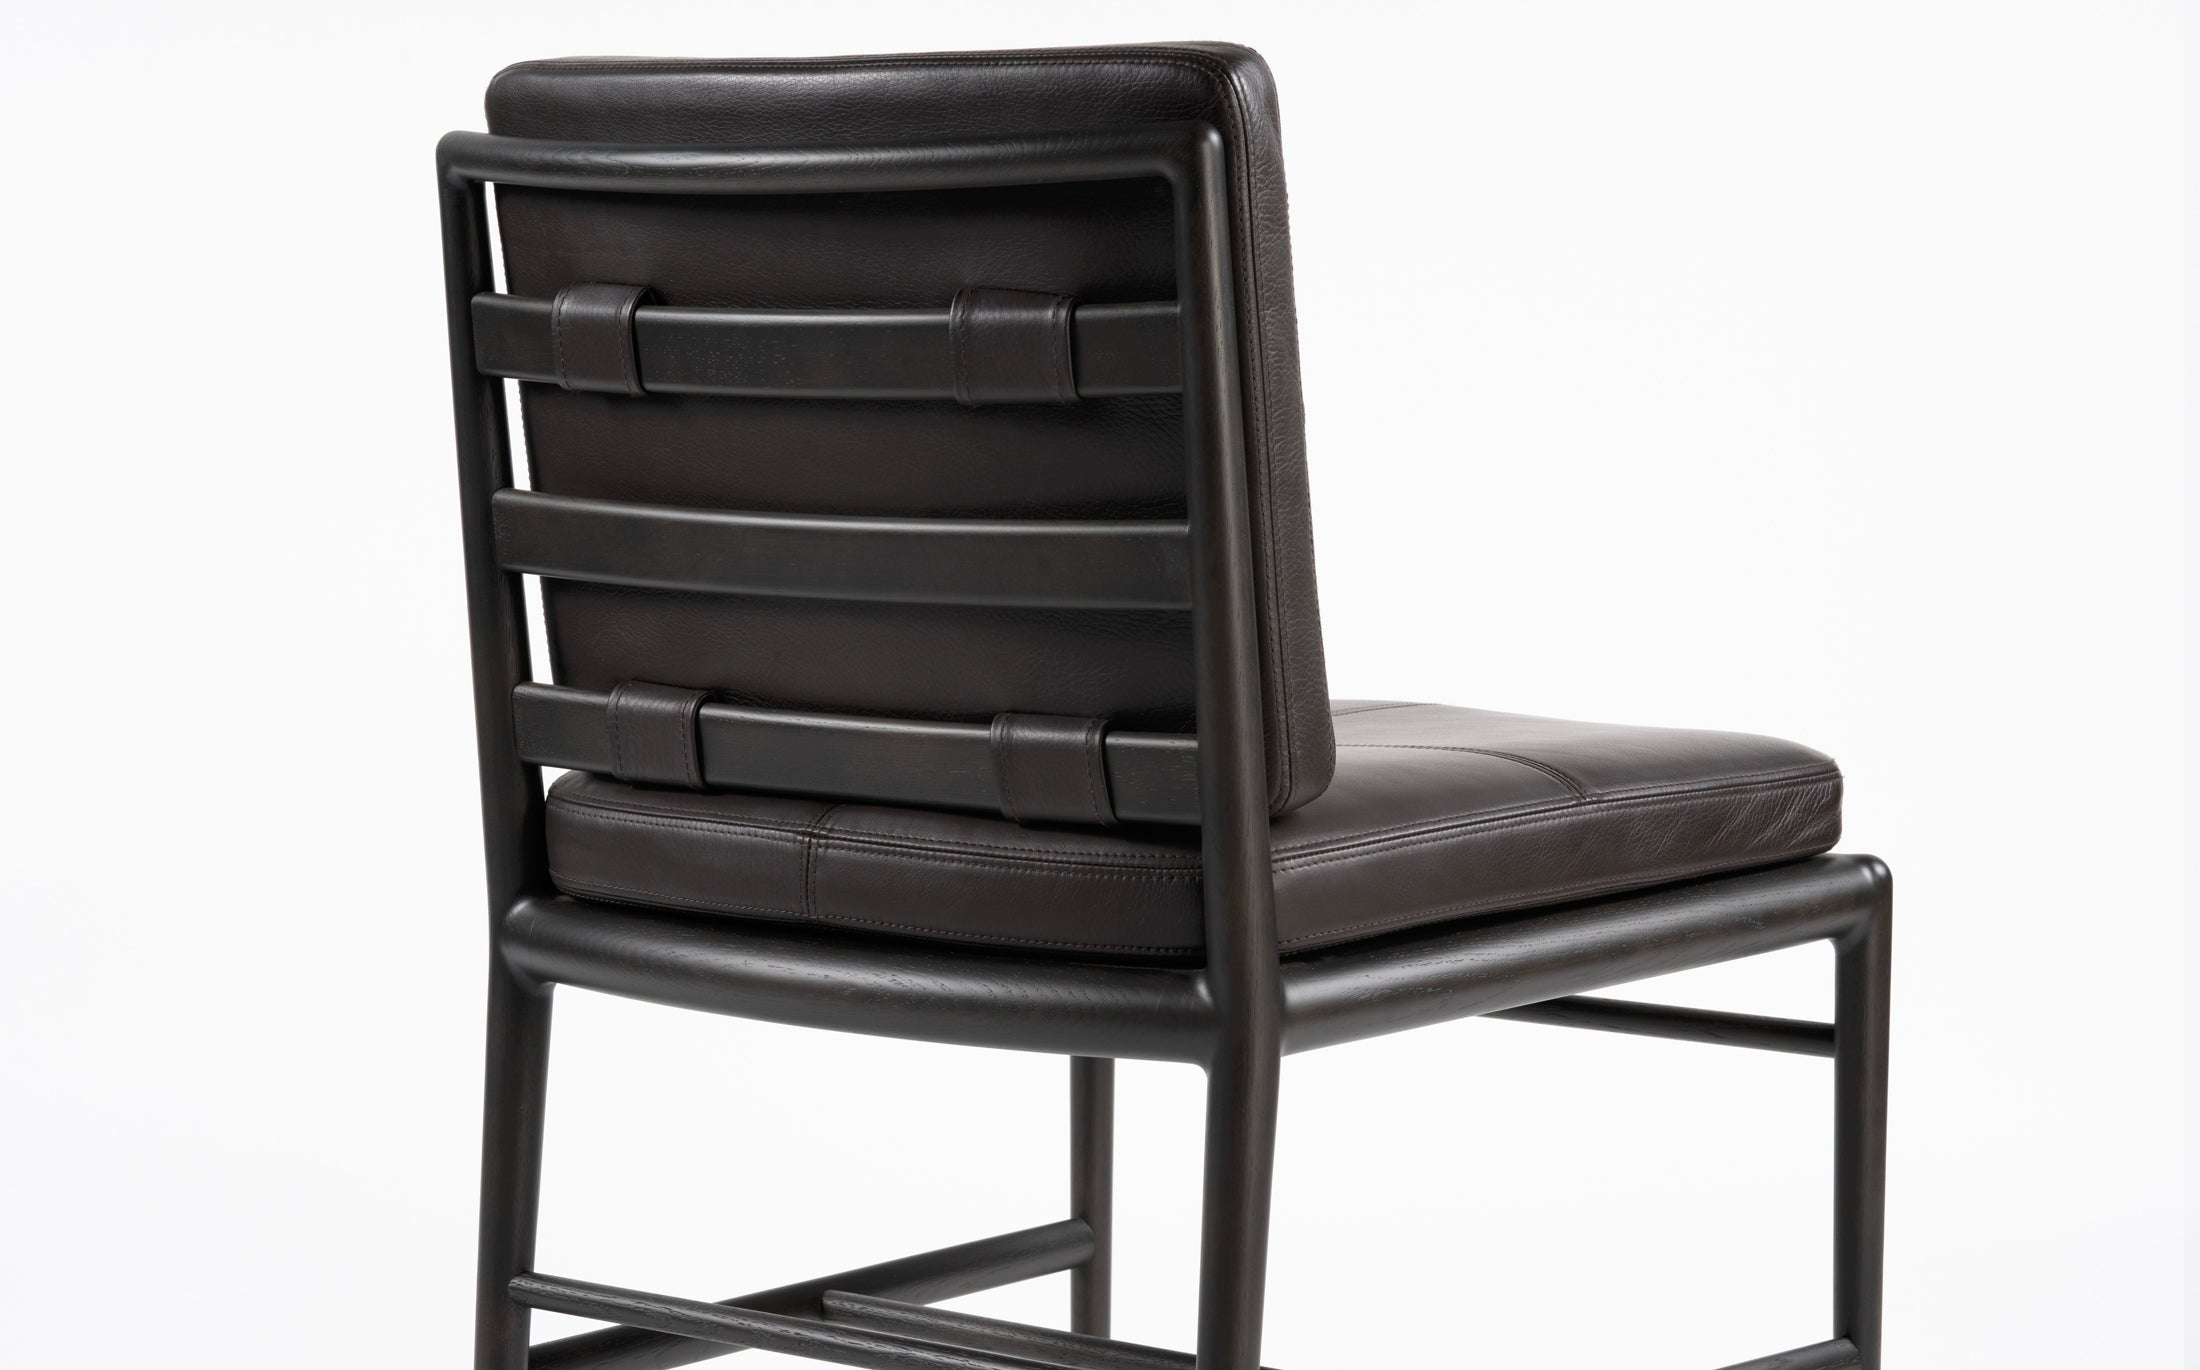 The sensitive comfortable side chair - Charcoal grey